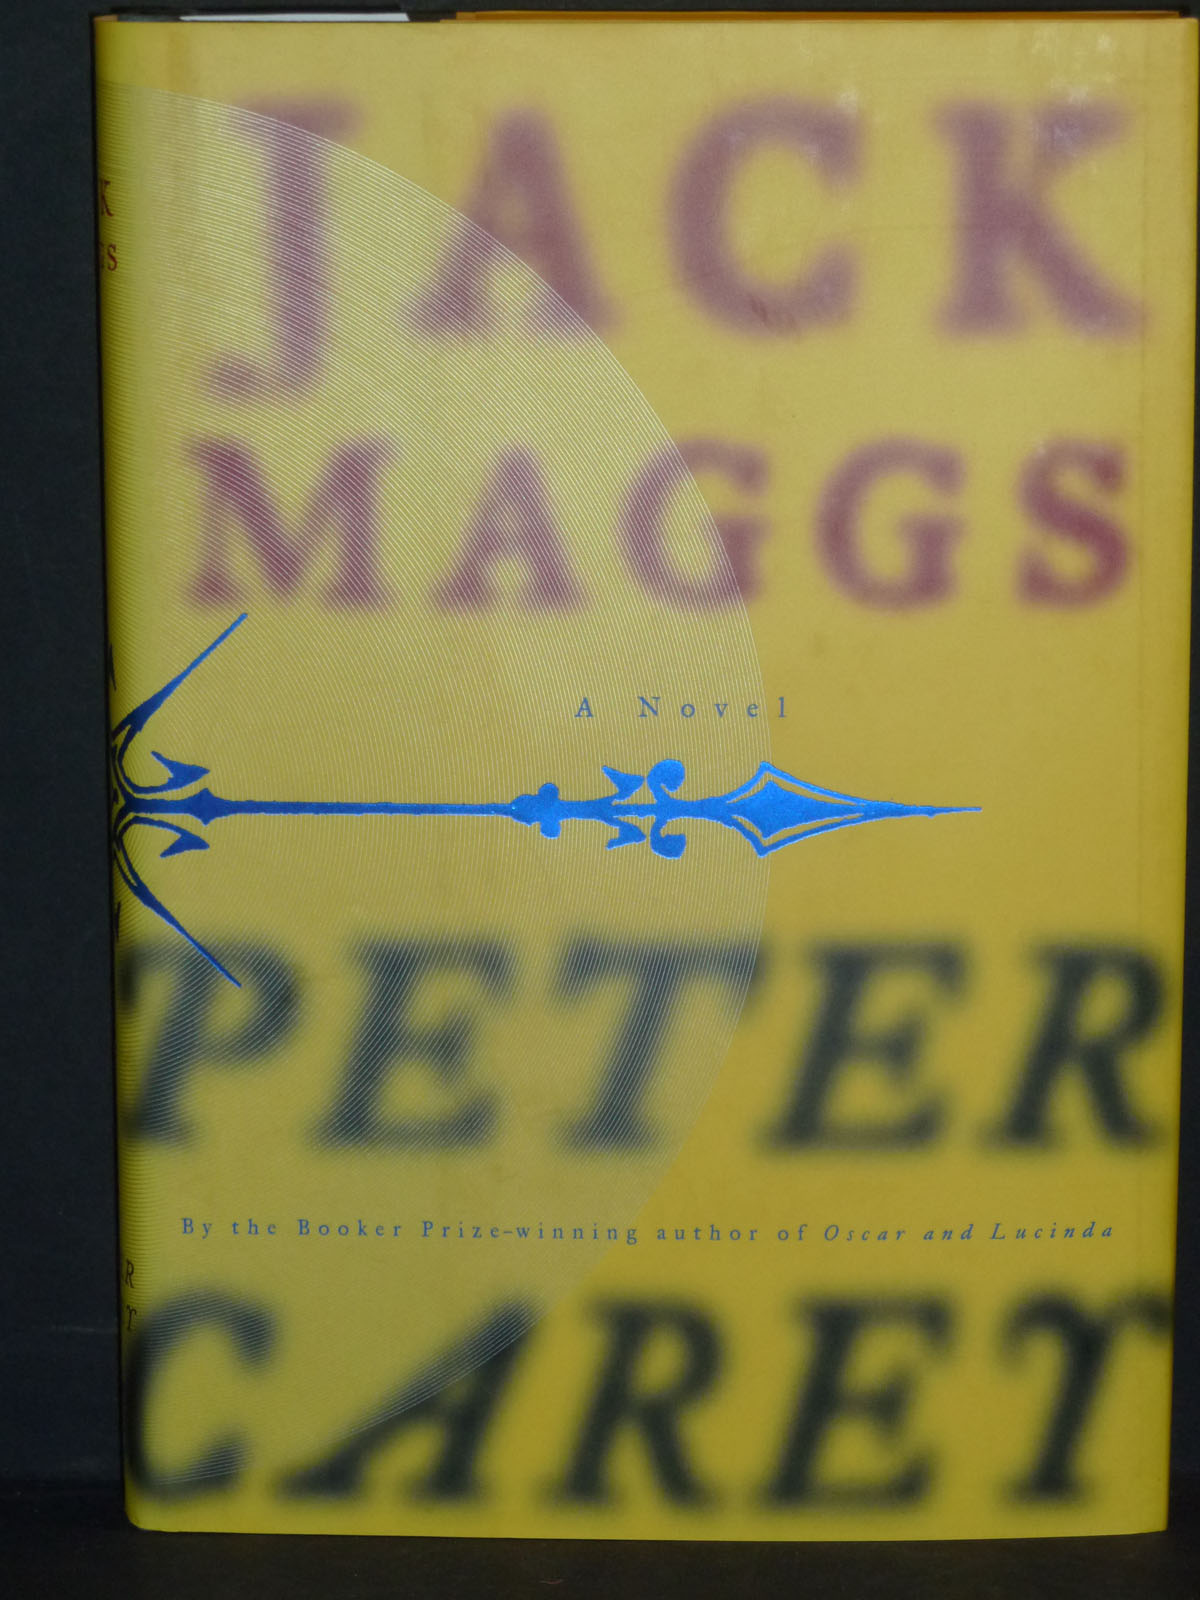 jack maggs